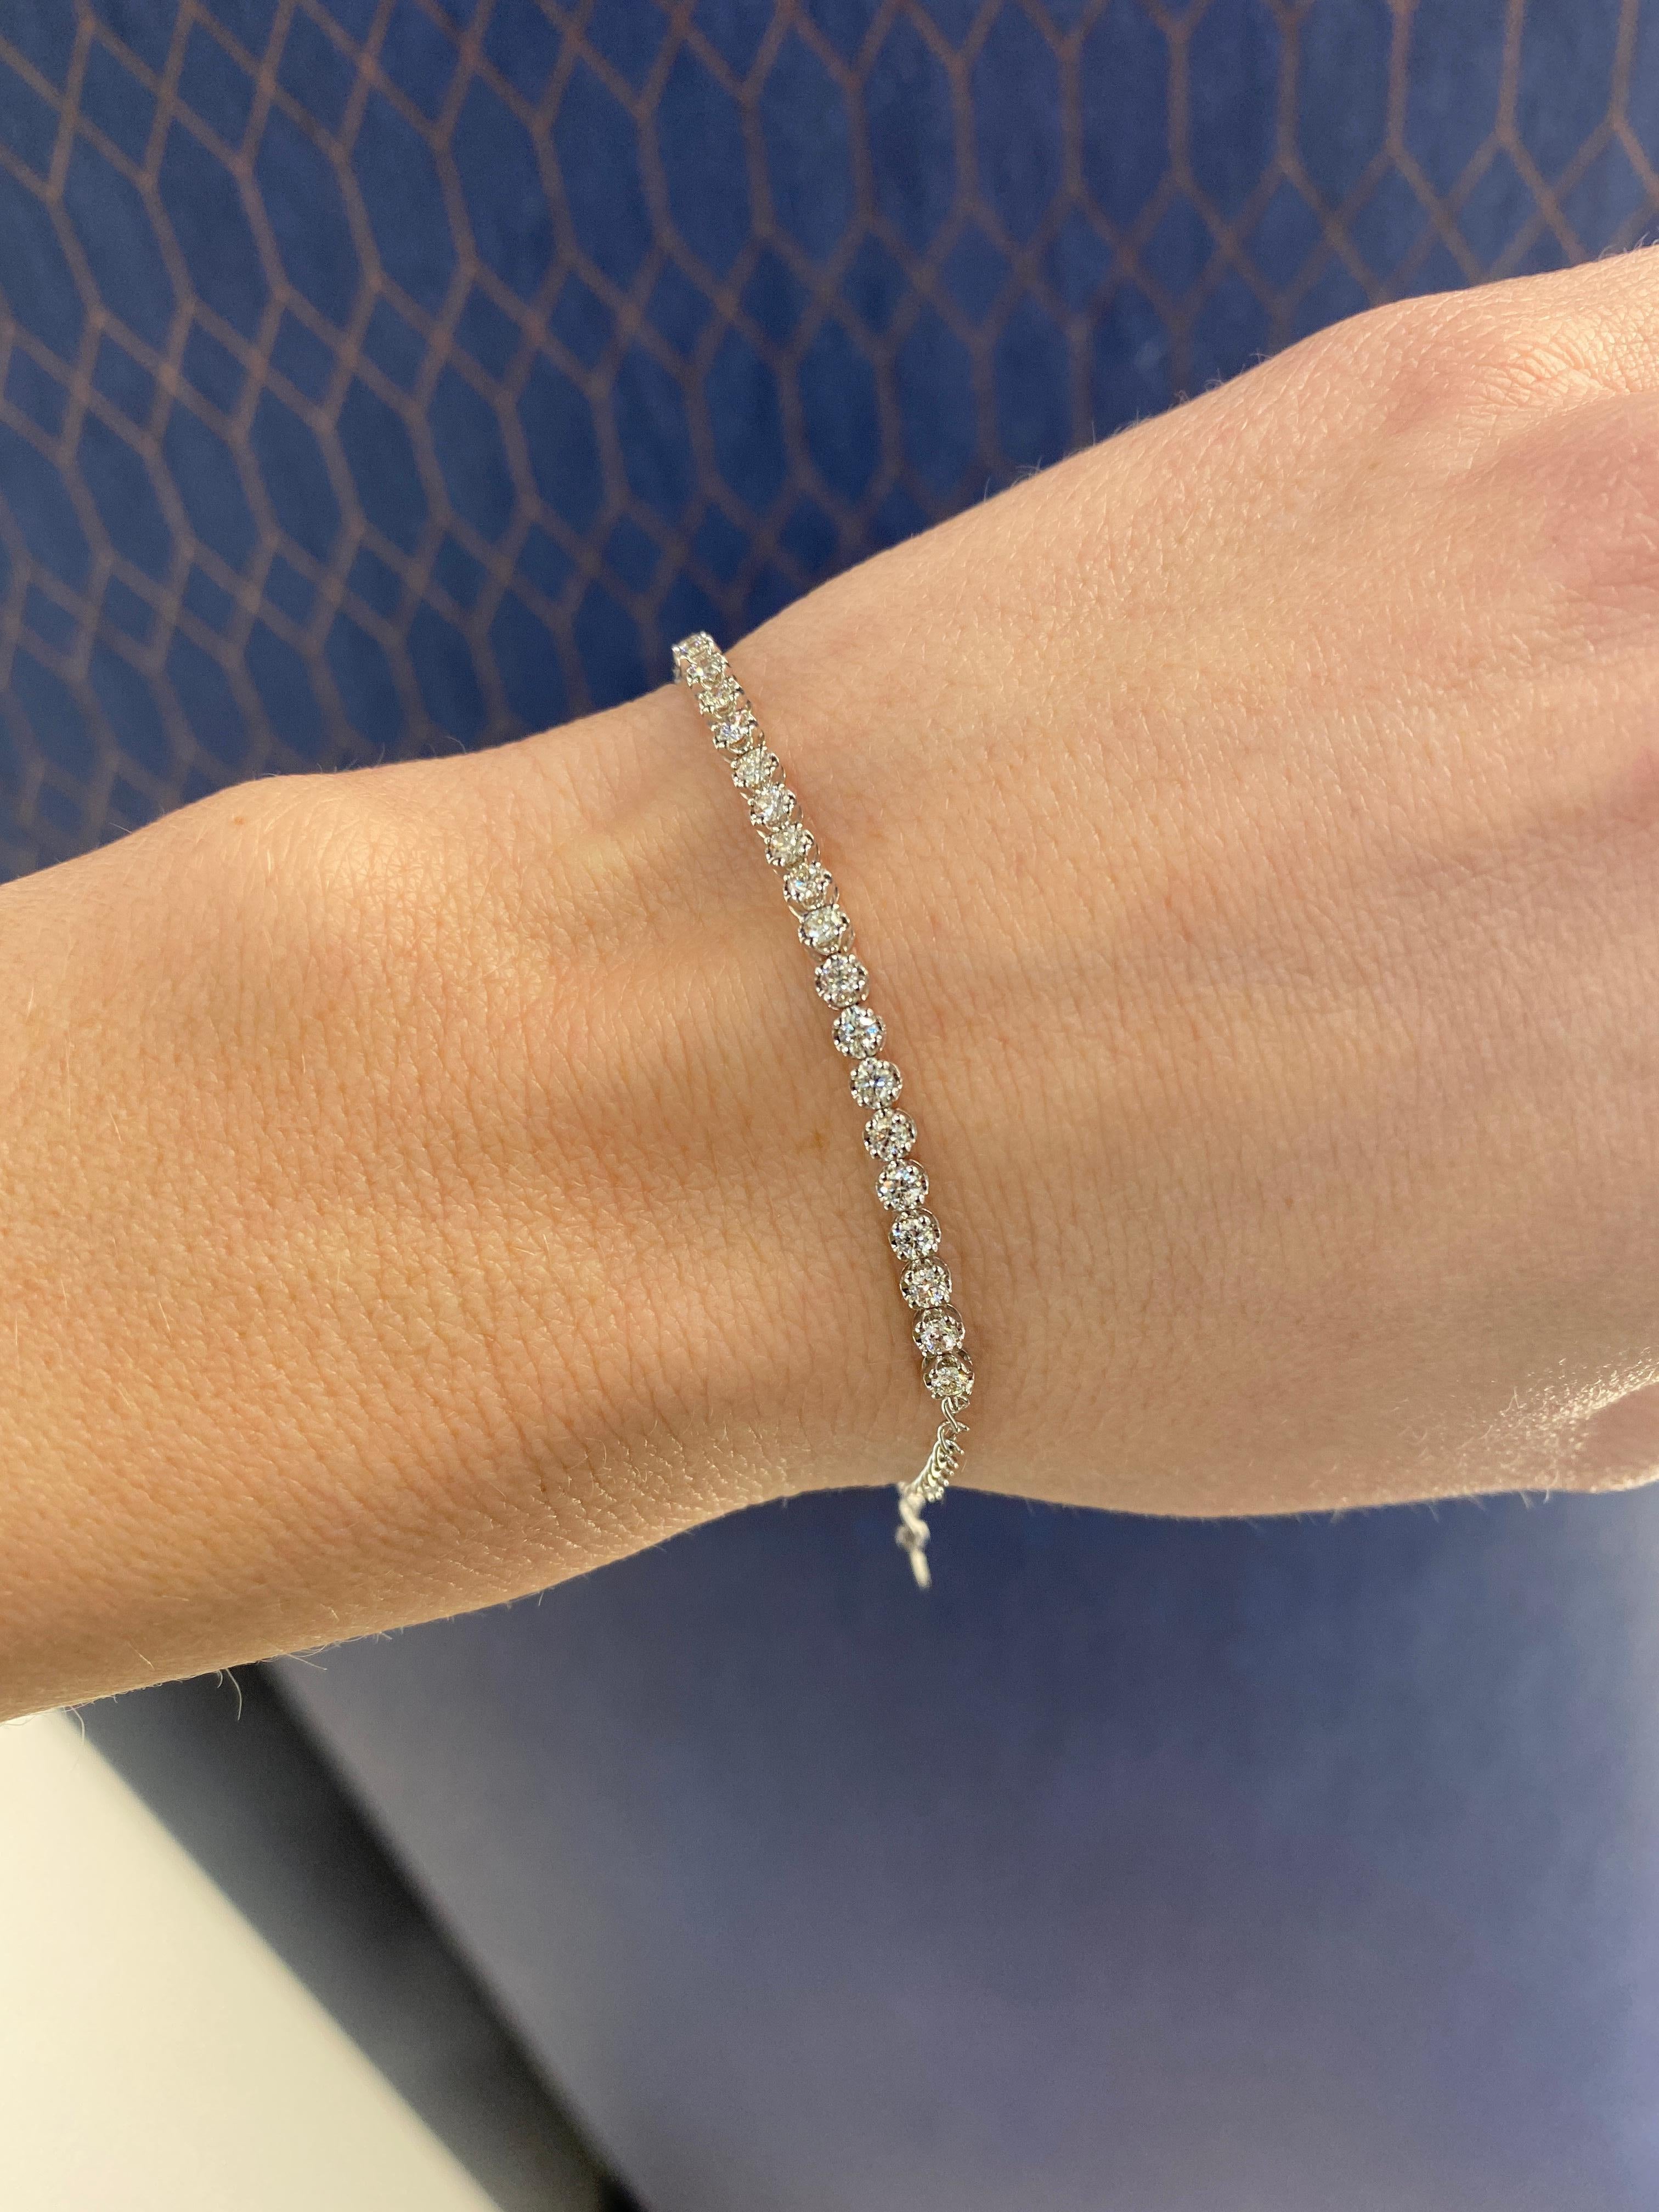 This classic tennis bracelet features 0.98 carat total weight in round diamonds that go about halfway around. It has a lobster clasp closure with heart charm. This bracelet can be worn everyday alone or layered with other bracelets. It is